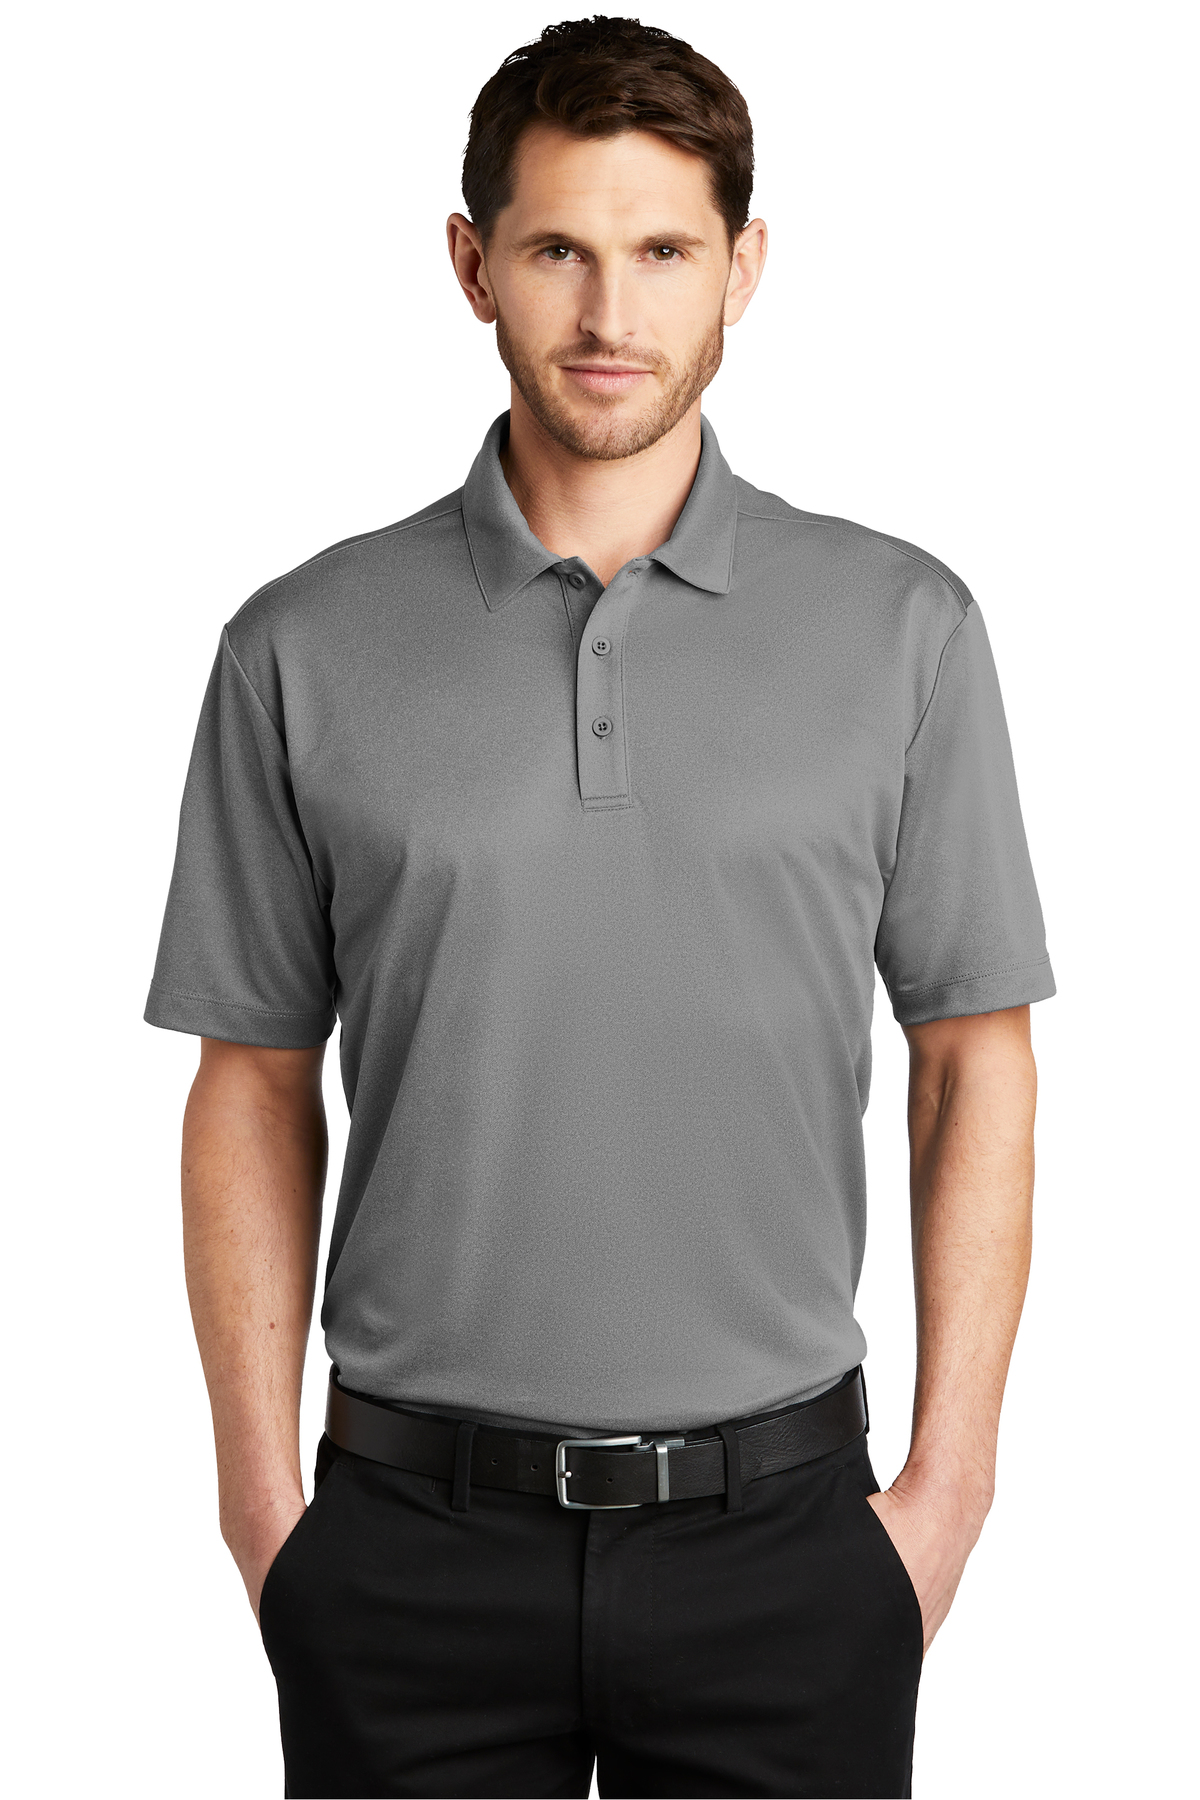 Port Authority Heathered Silk Touch Performance Polo | Product | Port ...